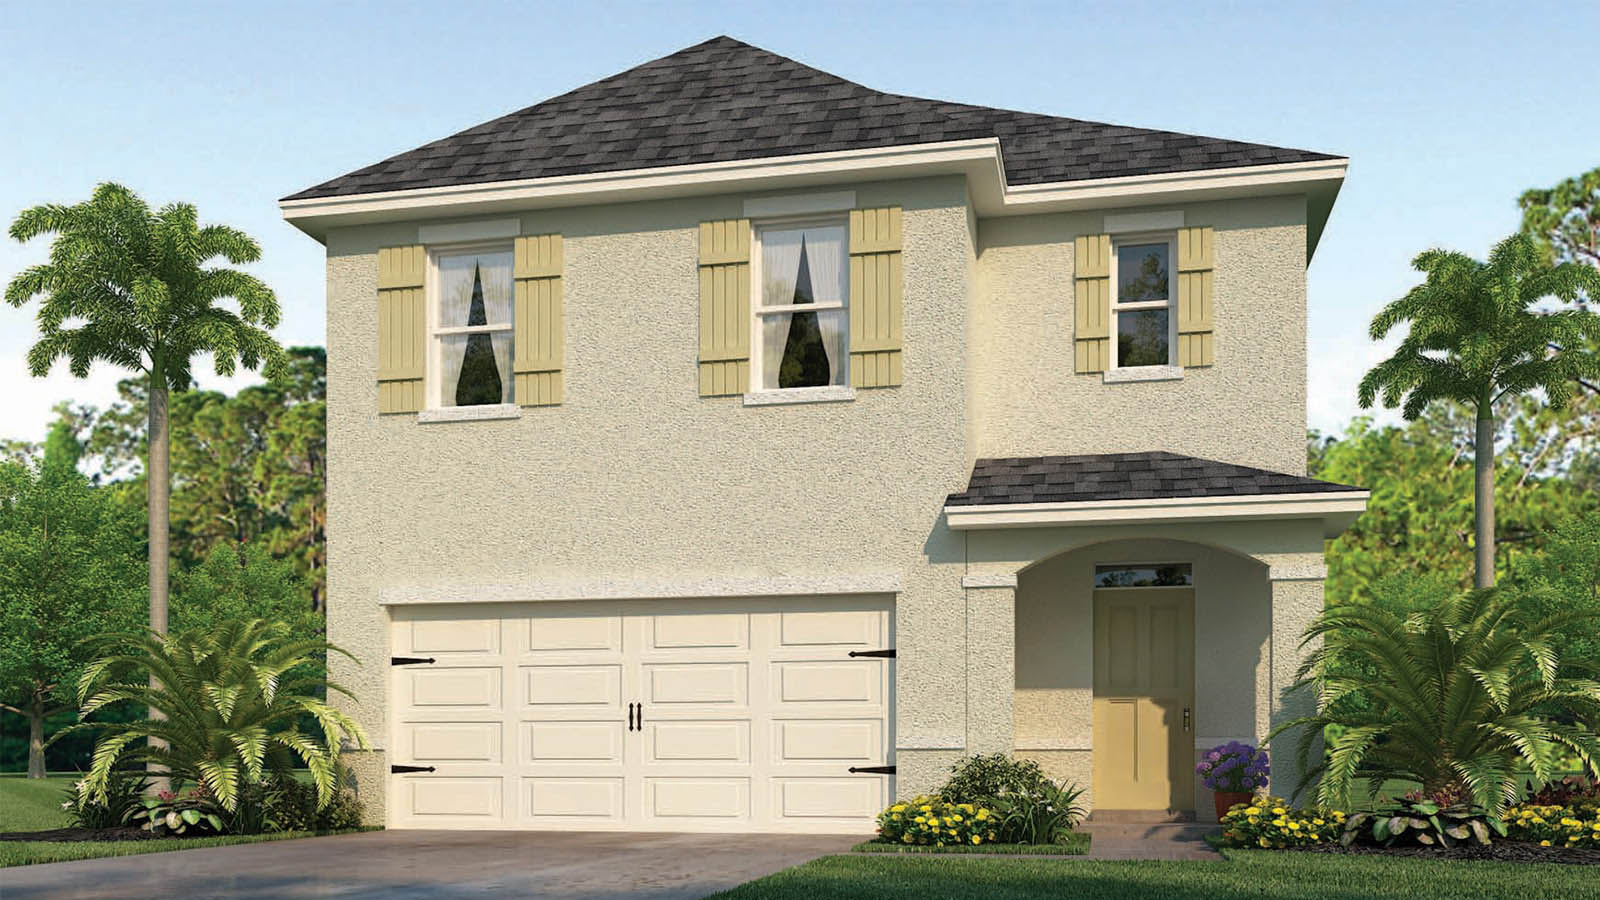 Exterior image of two story single family home